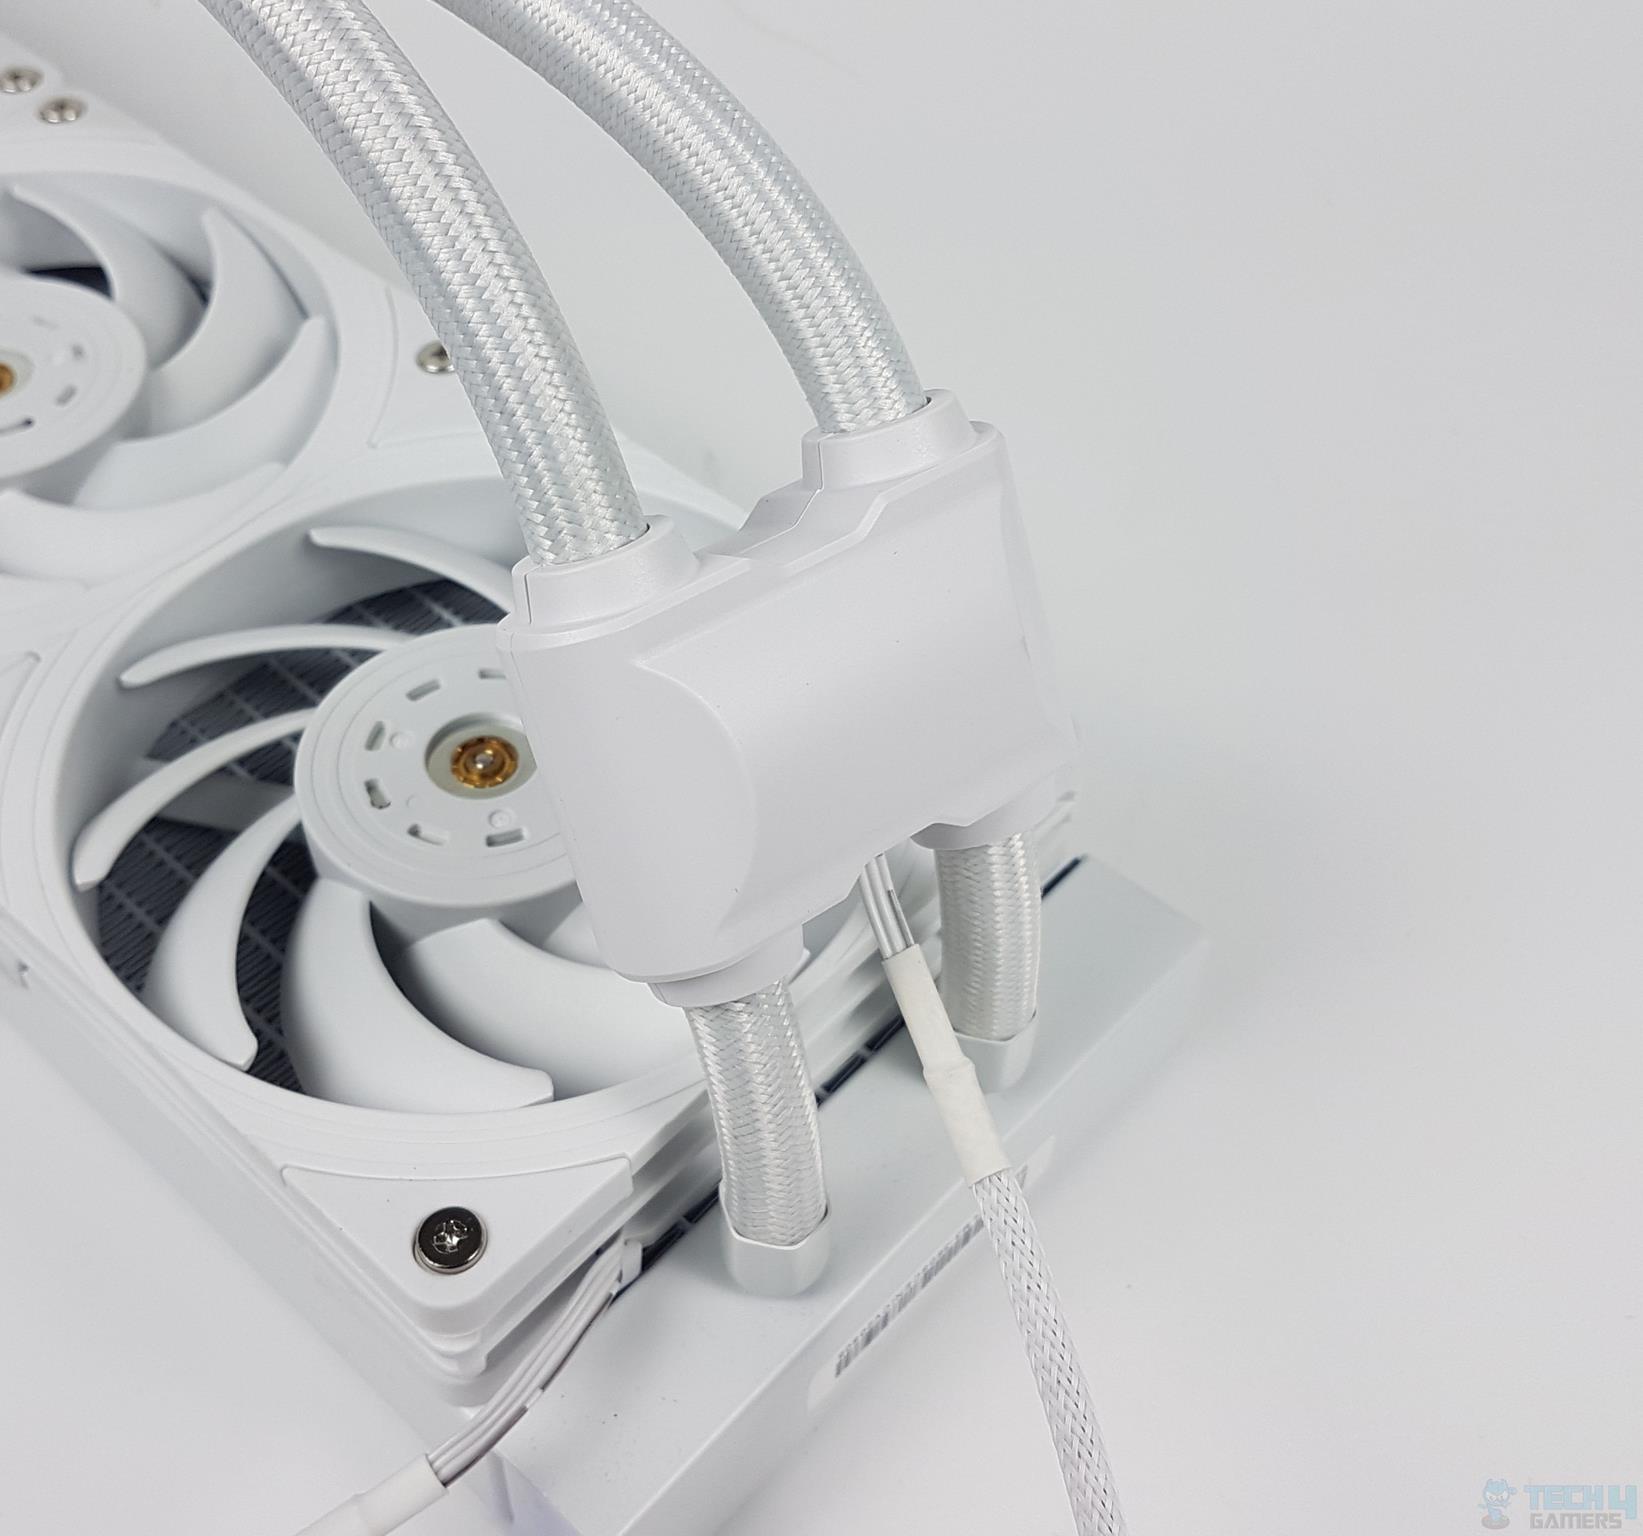 Thermalright Frozen Magic 360 Scenic V2 Radiator Pump (Image by Tech4Gamers)